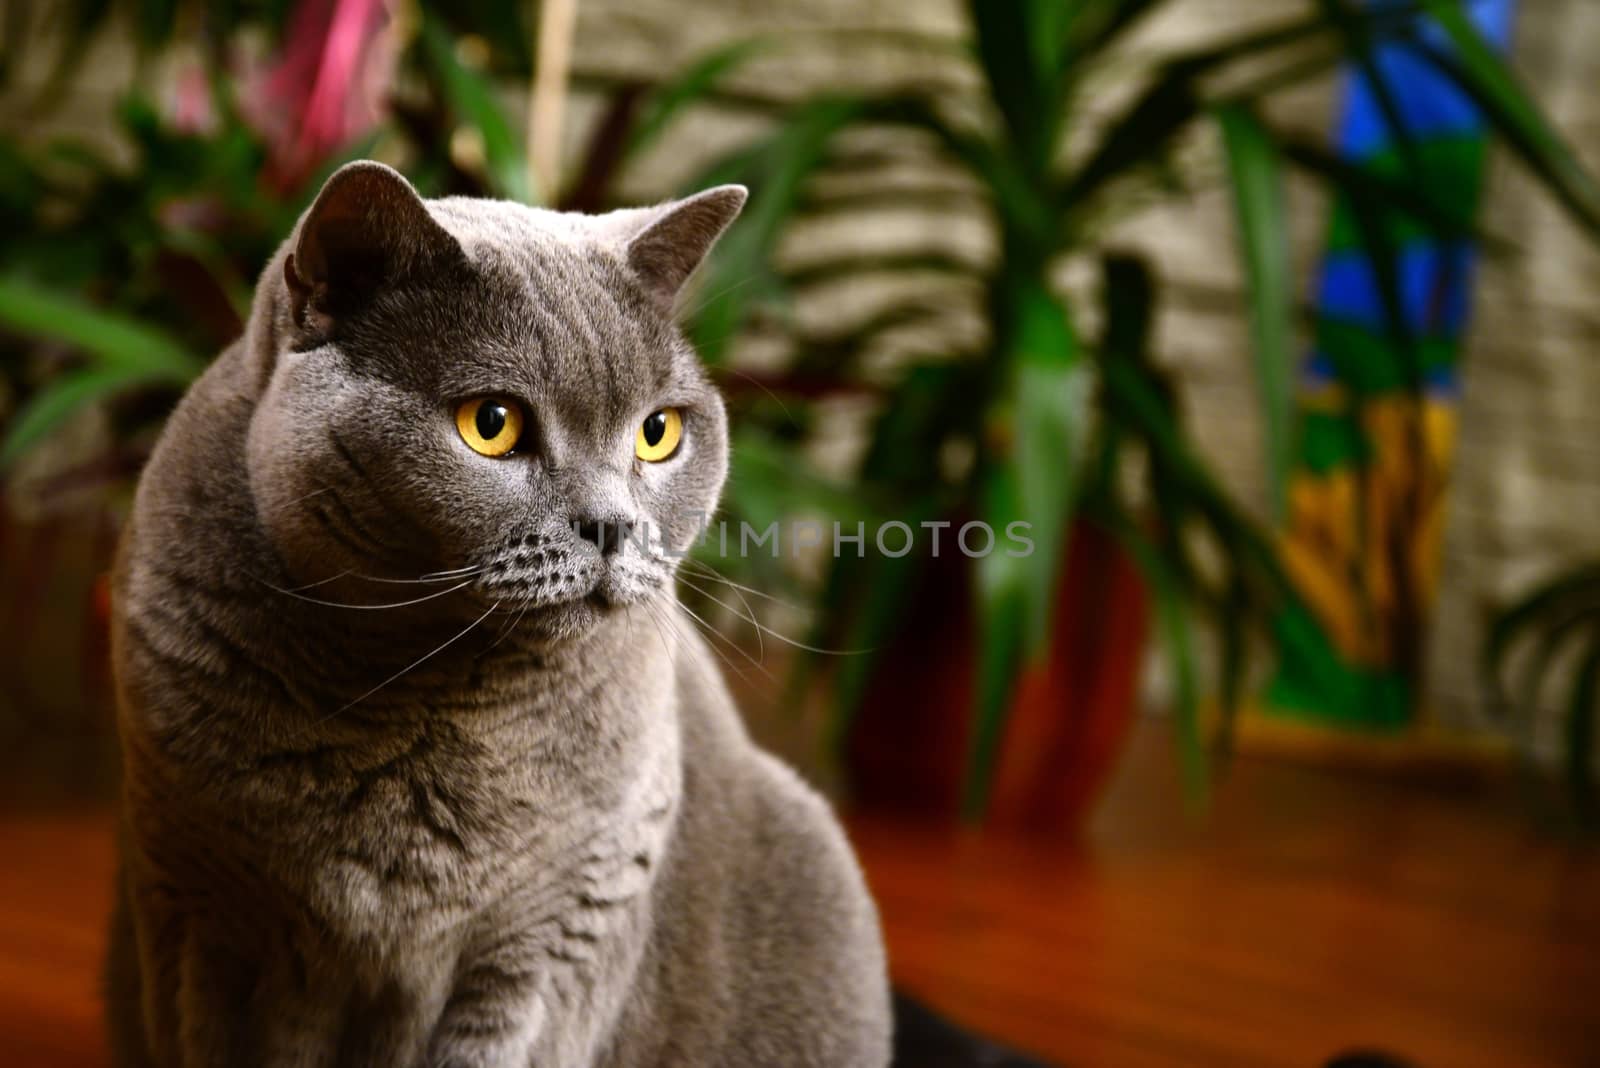 Portrait photo of a british blue cat with amber eyes. Taken in Germany.